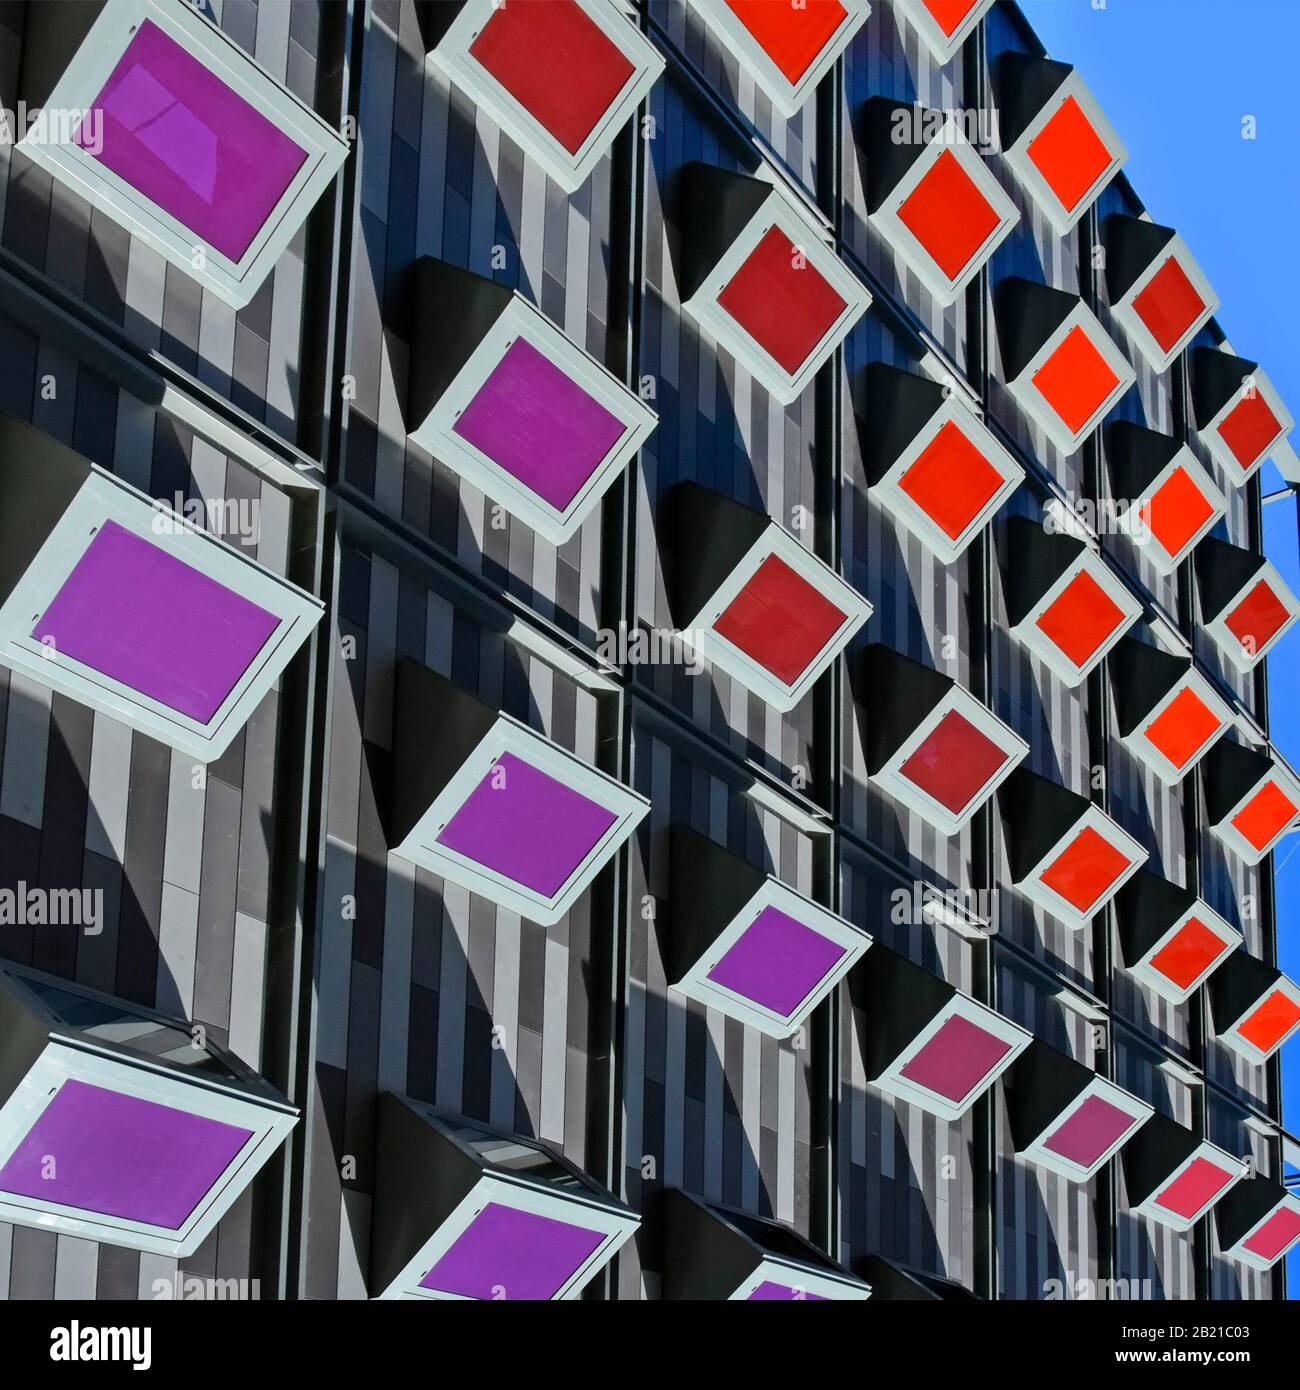 Inverted modern building structure facade creating a colourful imaginary architecture abstract pattern background of receding rectangles London UK Stock Photo